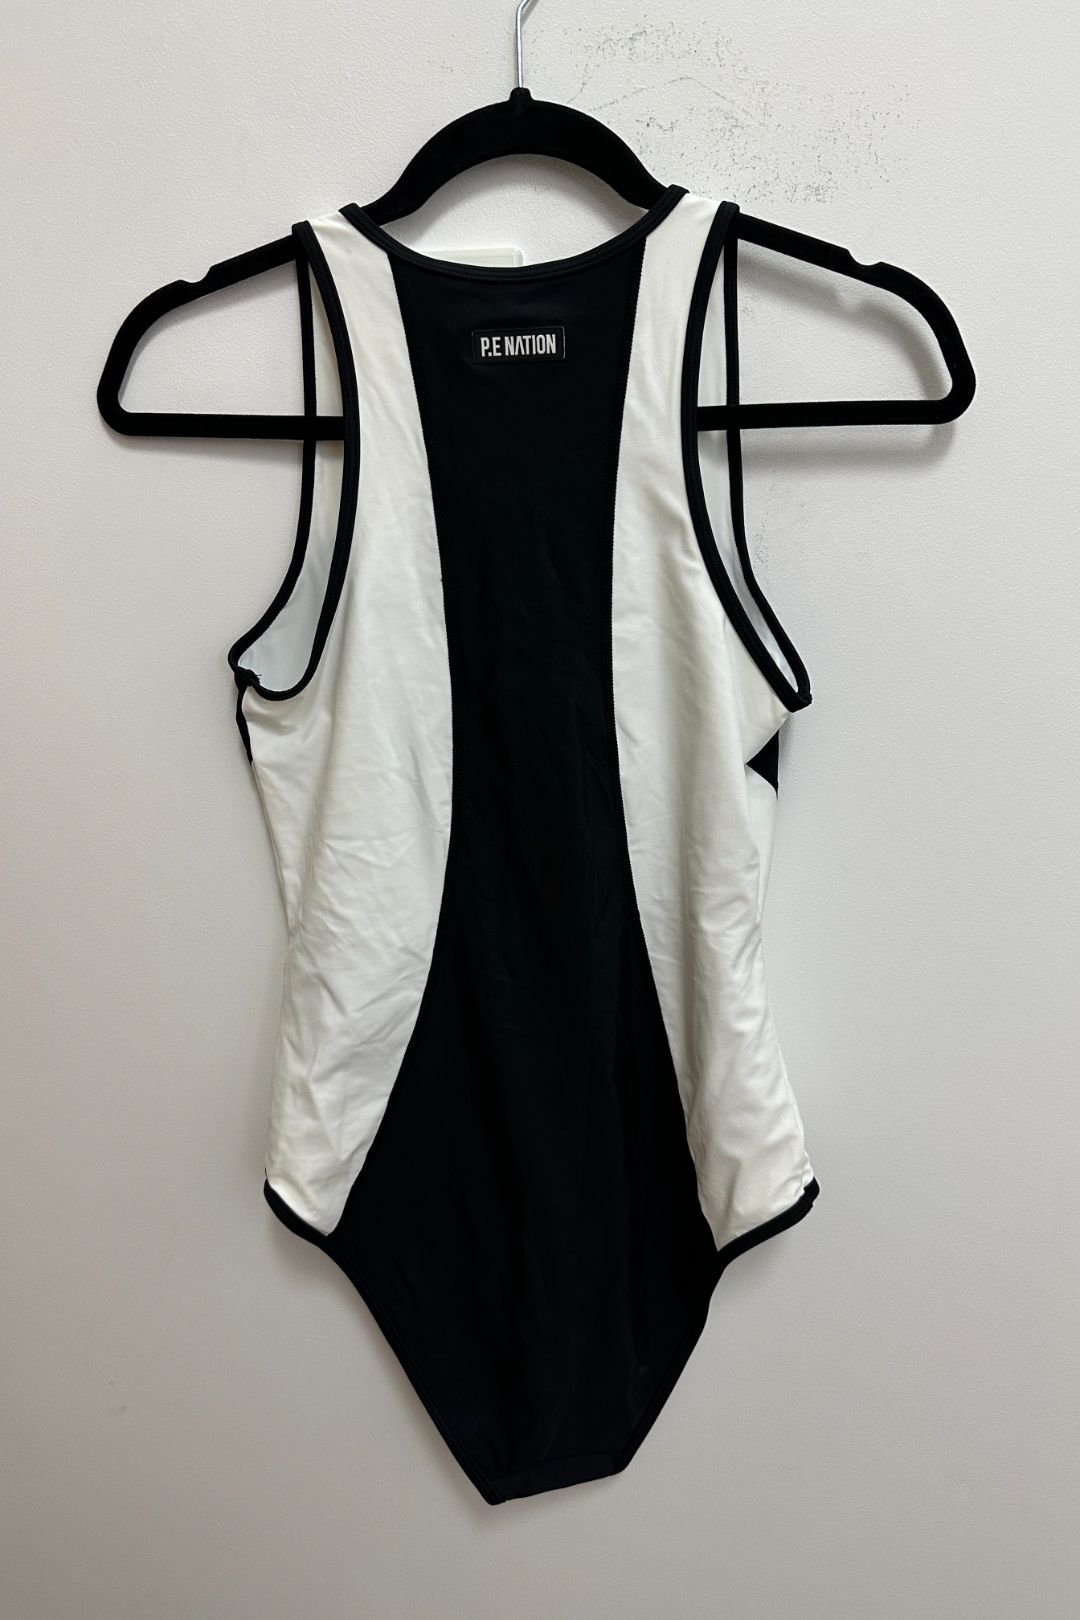 Black and White Super Sprint One Piece Swimsuit